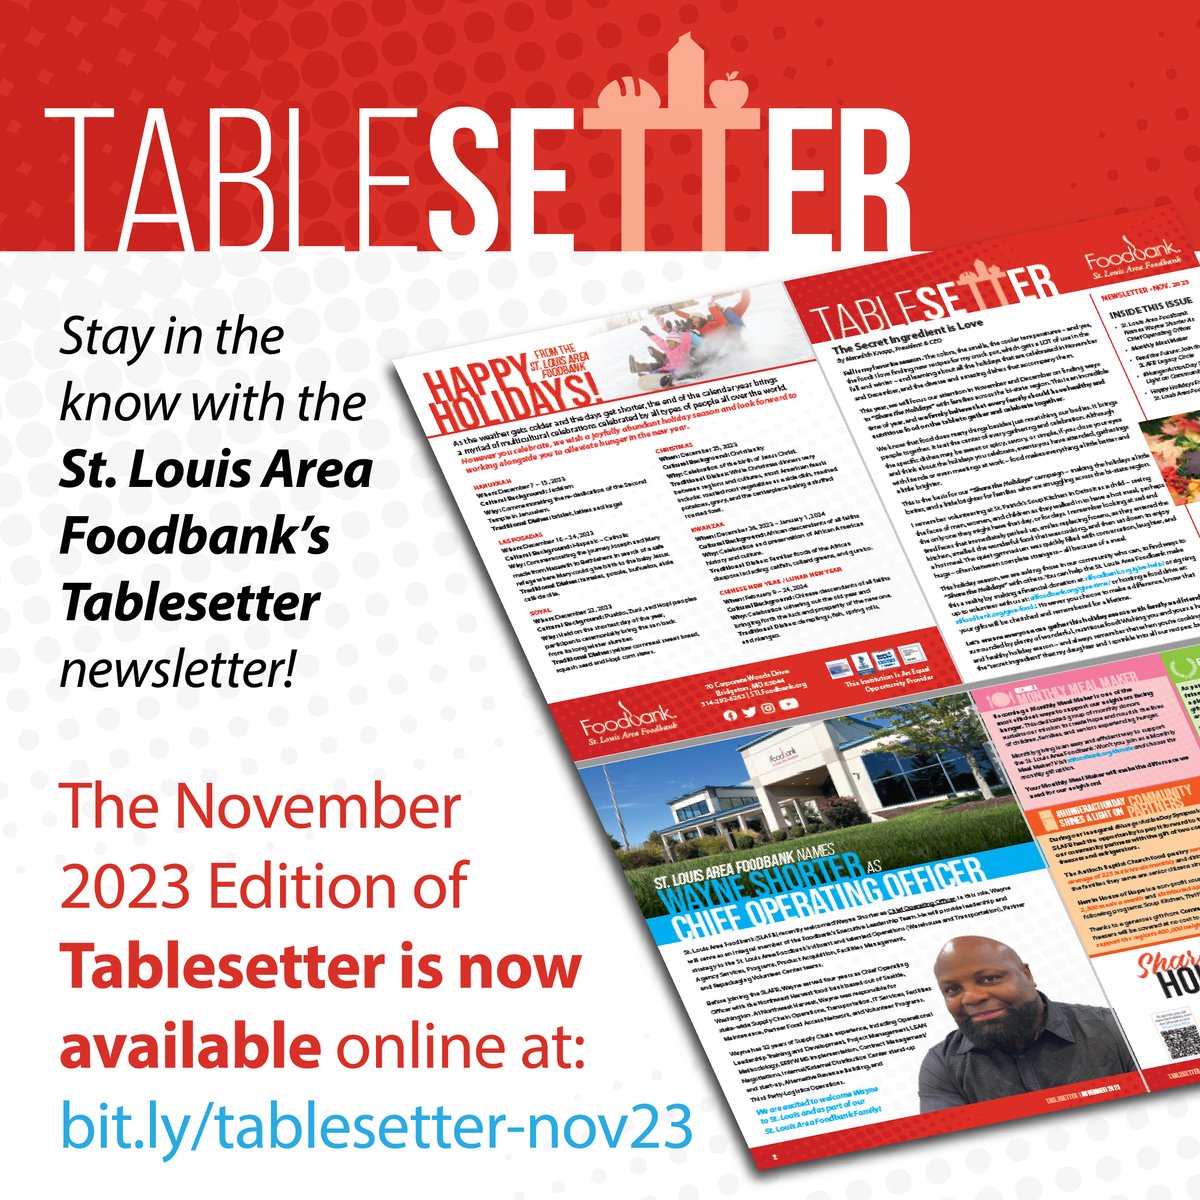 Stay in the know with the St. Louis Area Foodbank’s Tablesetter newsletter! In this edition, President & CEO, Meredith Knopp, discusses “Share the Holidays” and other opportunities to make a difference in the lives of neighbors this holiday season. bit.ly/tablesetter-no…